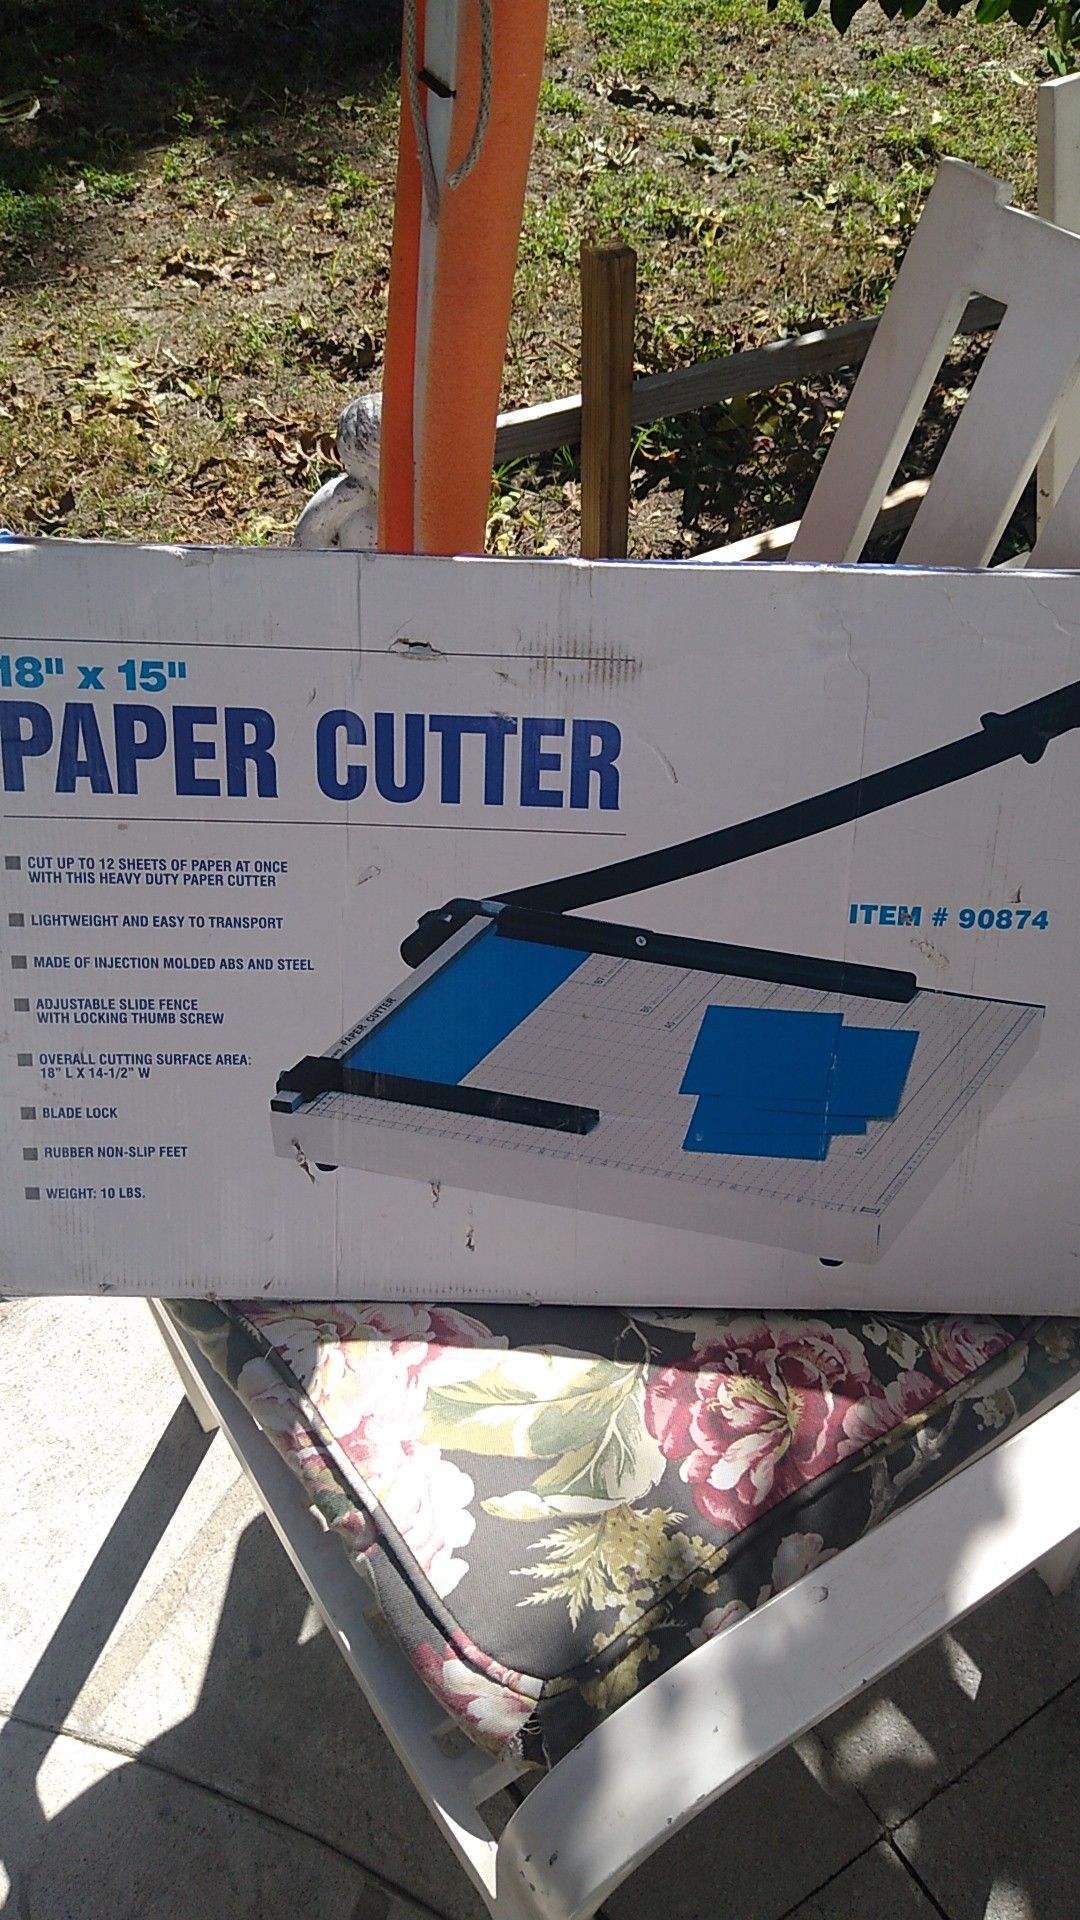 18 by 15 paper cutter